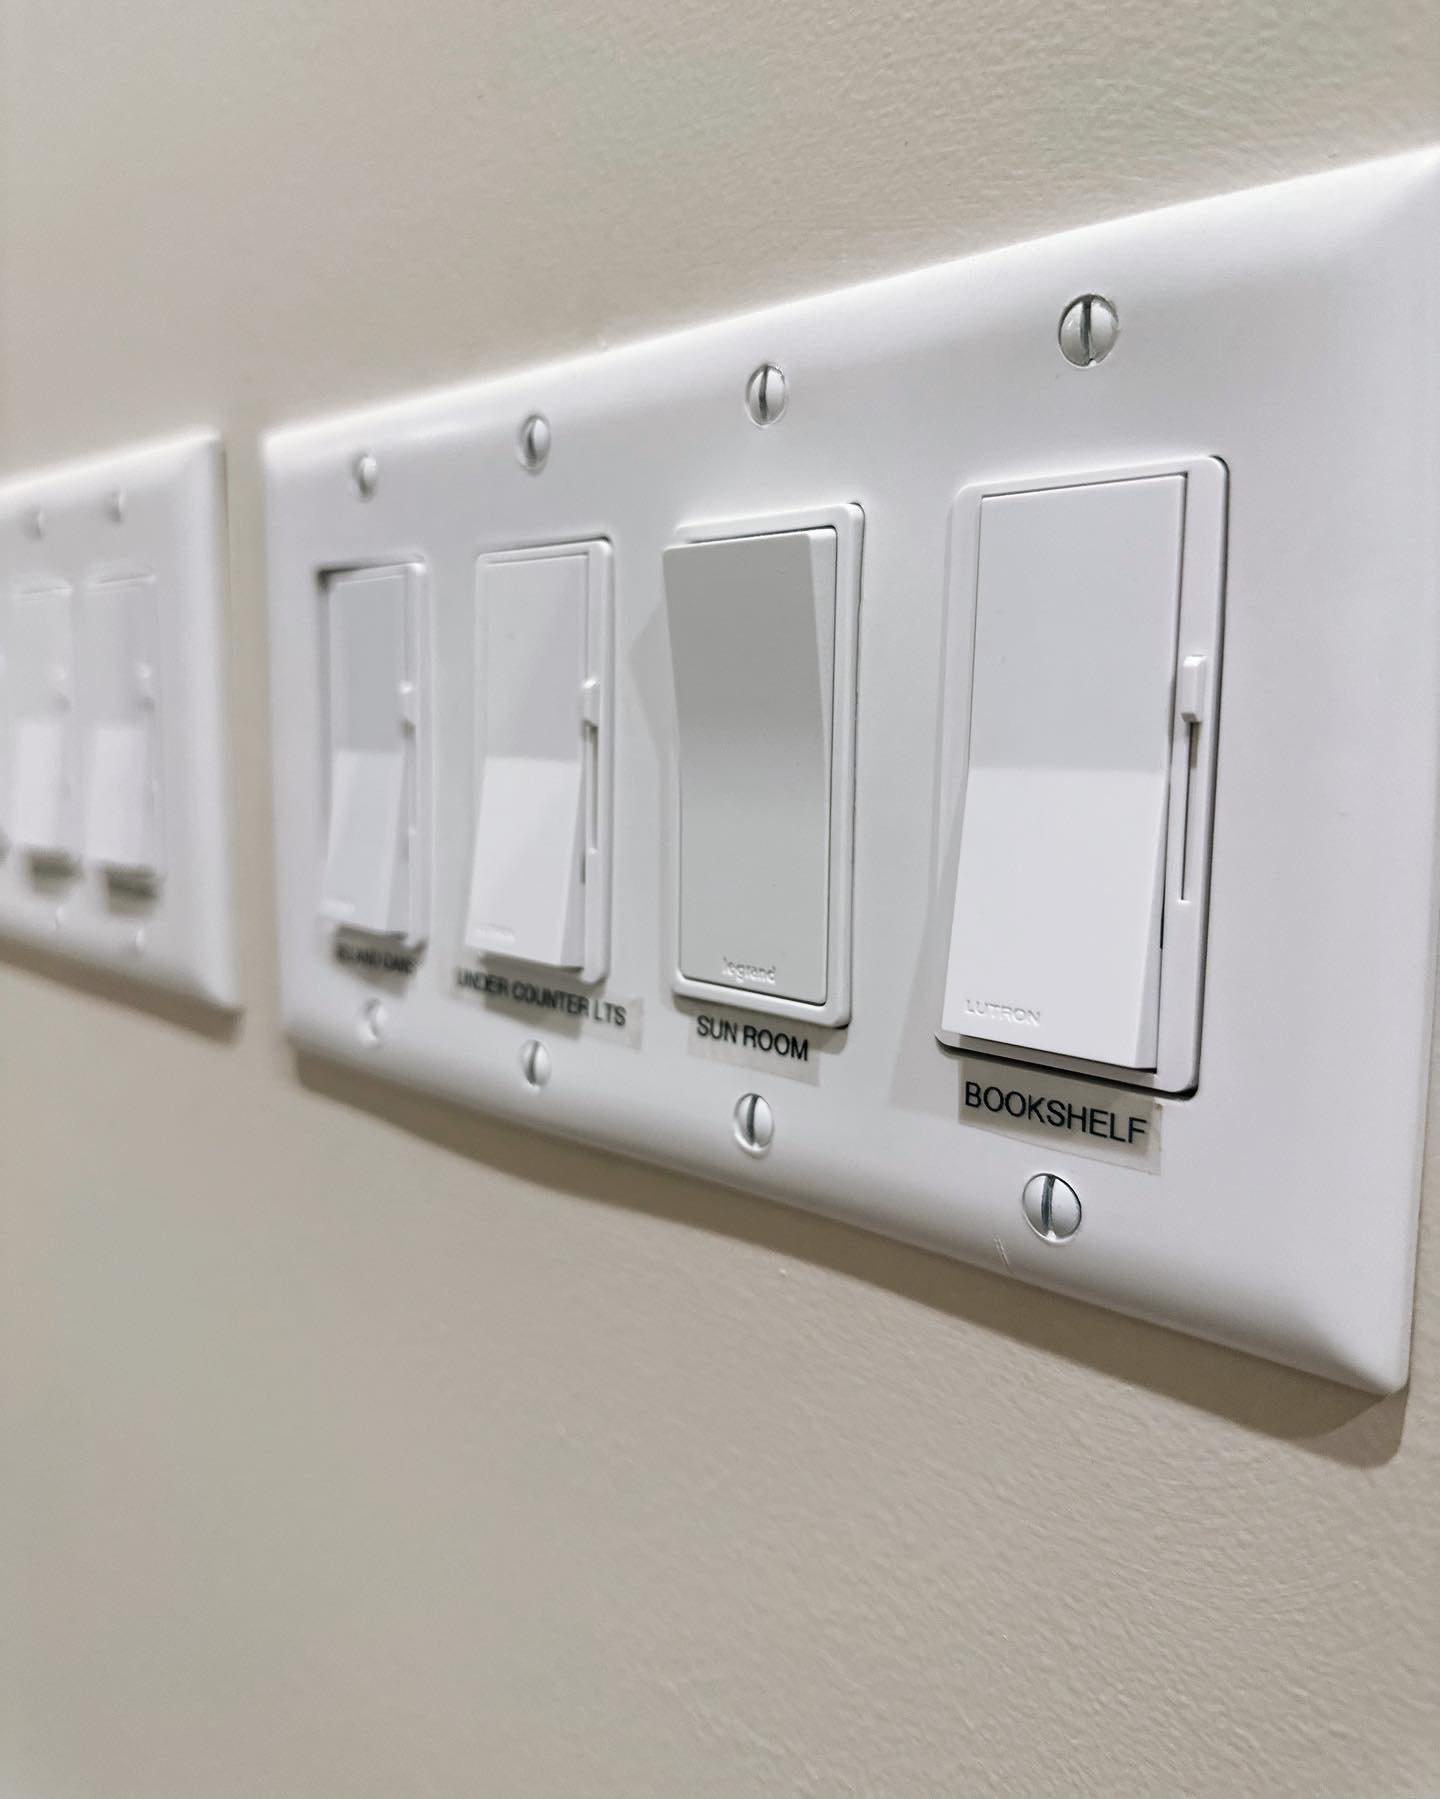 ON/OFF 💡We are more than an organizing company- we exist to make our client&rsquo;s lives better and their homes easier to live in! 

This client needed light switch labeling throughout her renovated home as she got accustomed to all the newness.  S